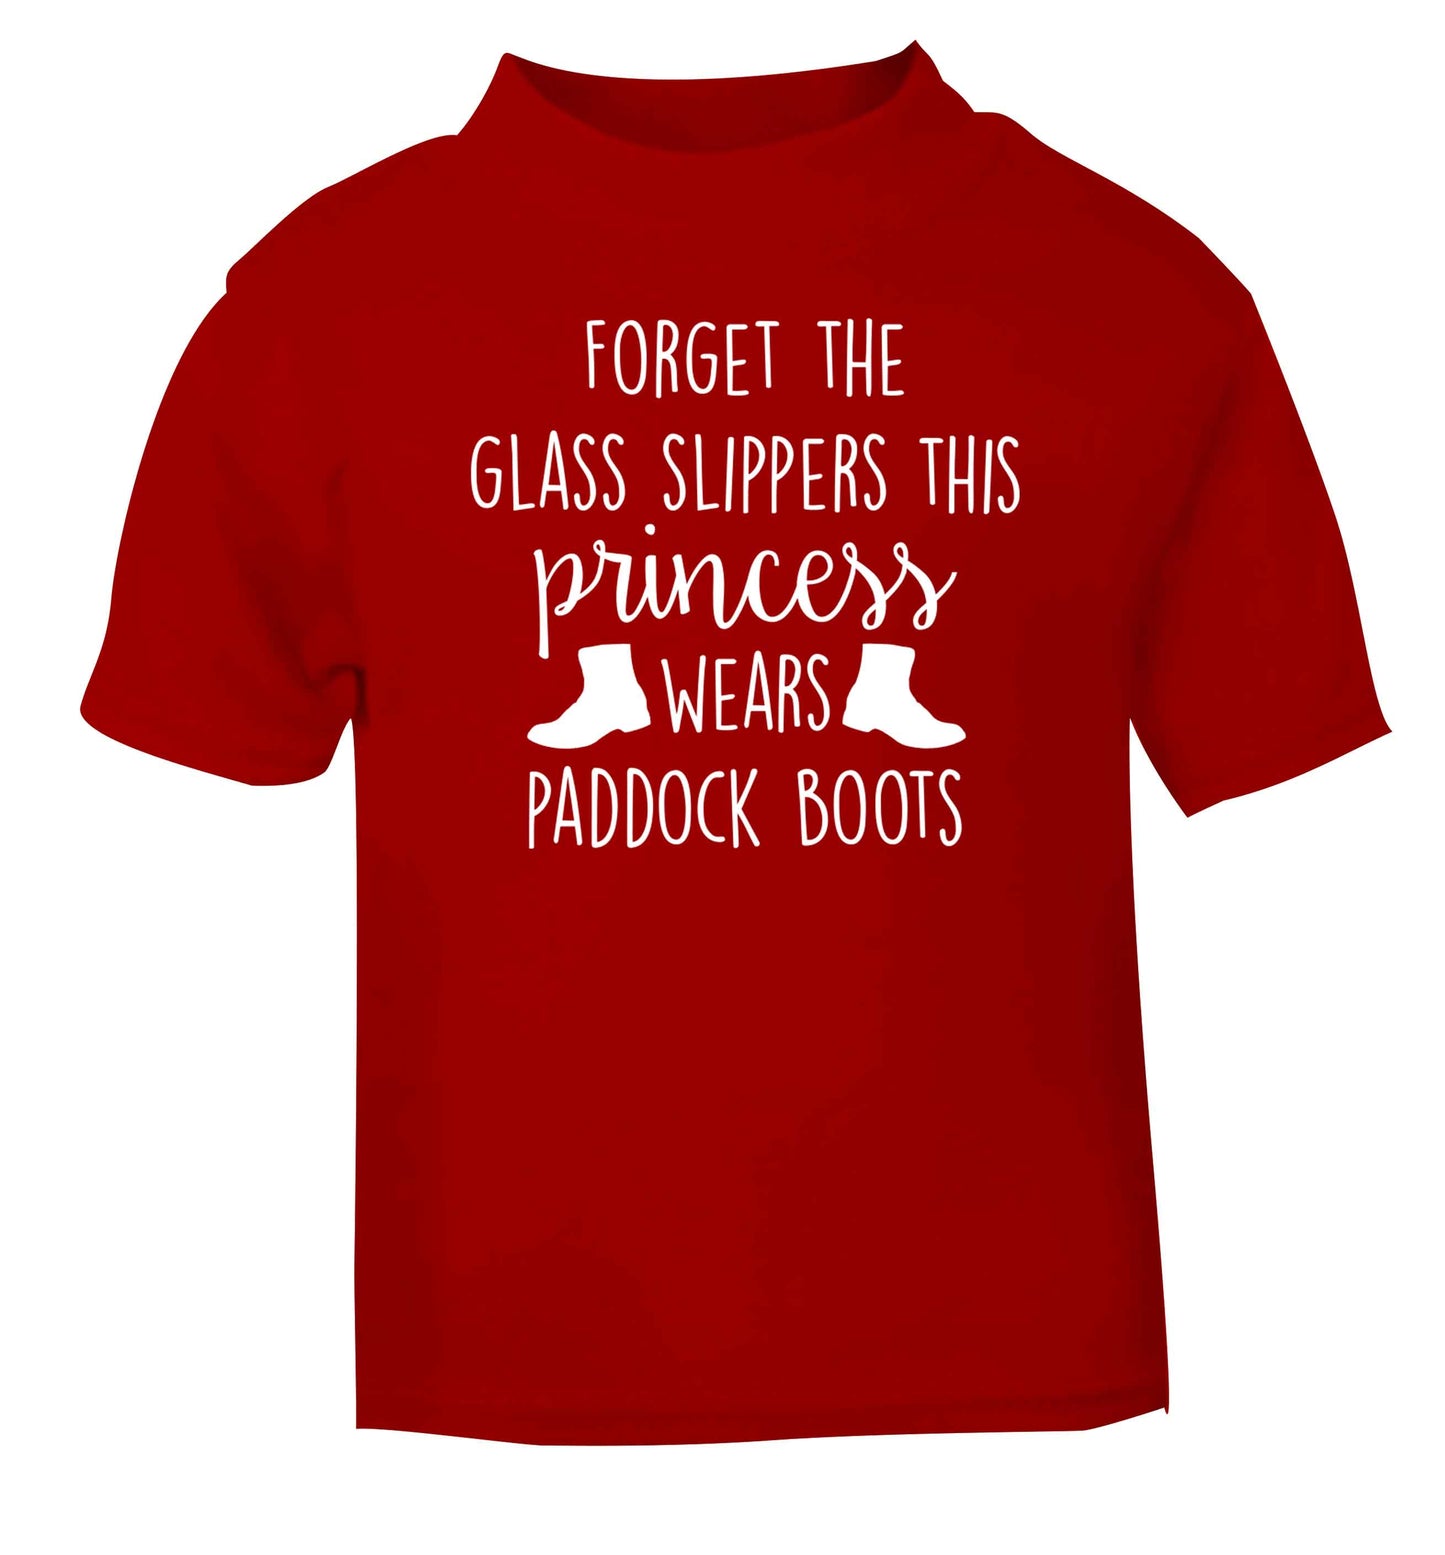 Forget the glass slippers this princess wears paddock boots red baby toddler Tshirt 2 Years